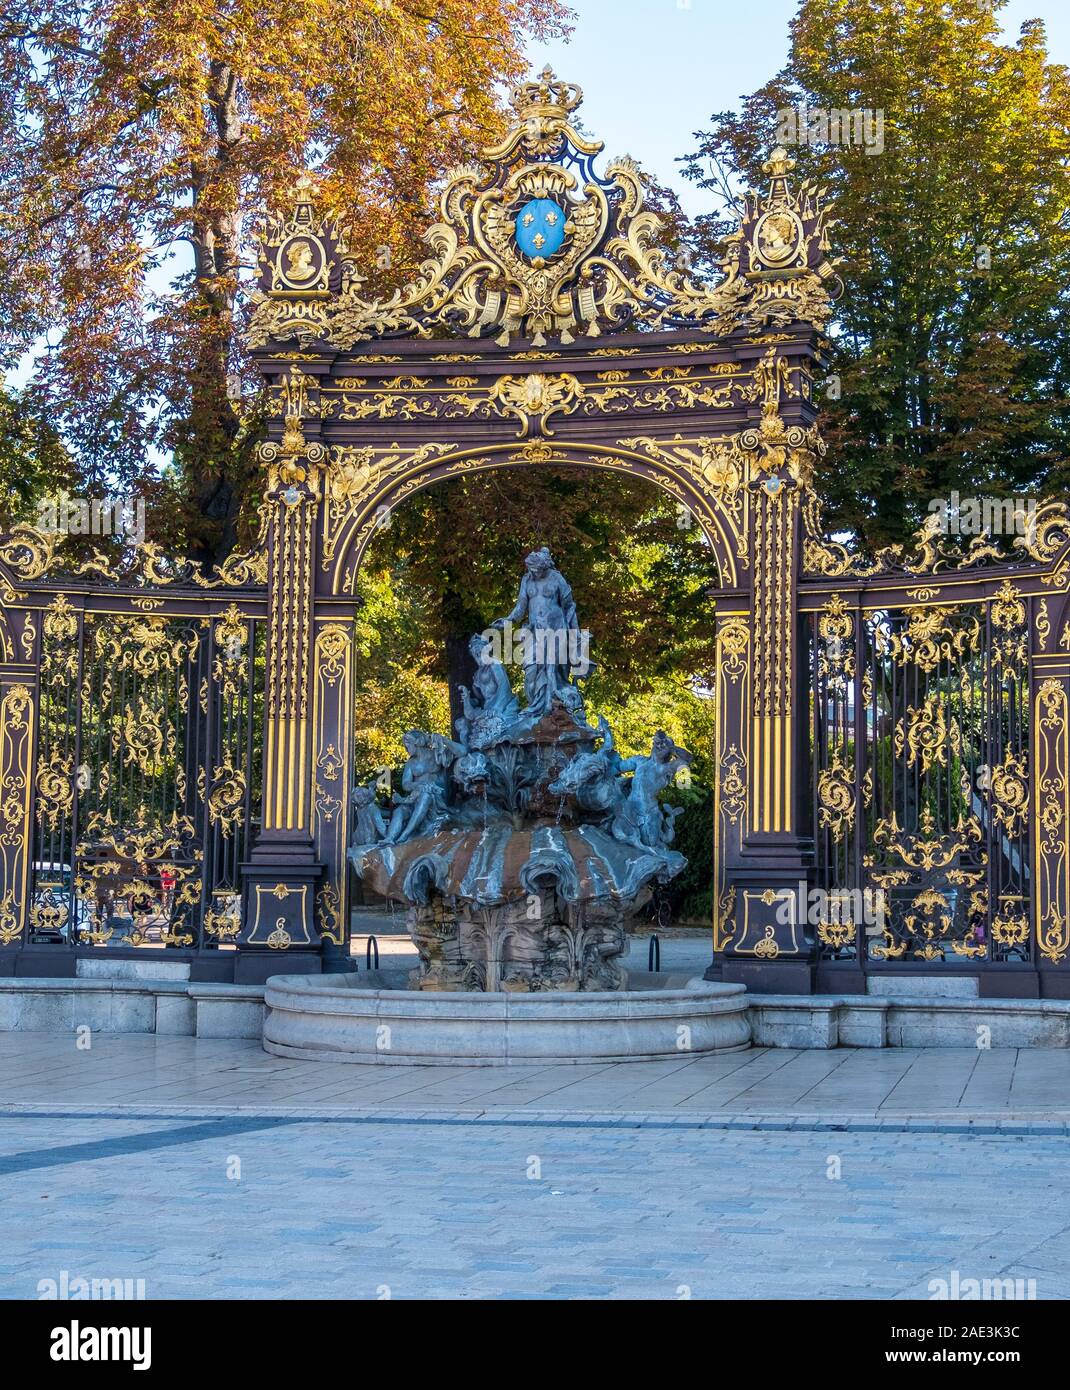 Nancy, France - August 31, 2019: Golden gate to the Place Stanislas square and Fountain in Nancy, Lorraine, France. A UNESCO World Heritage Site Stock Photo